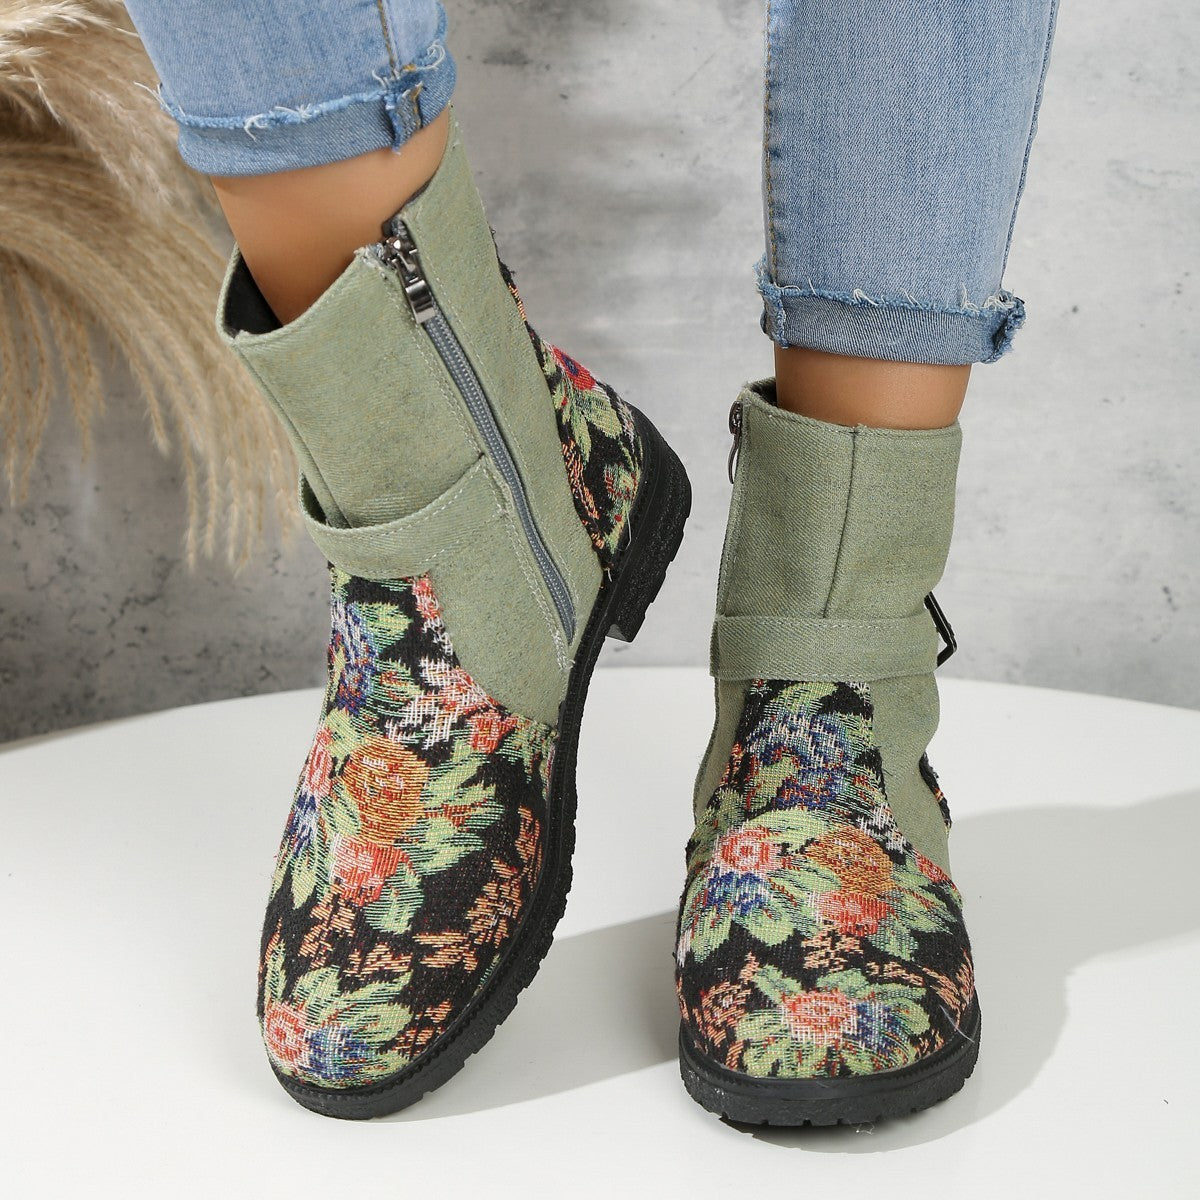 Flowers Print Ankle Boots Women Retro Belt Buckle Chunky Heels Cowboy Boots With Side Zipper Autumn And Winter Round Toe Shoes